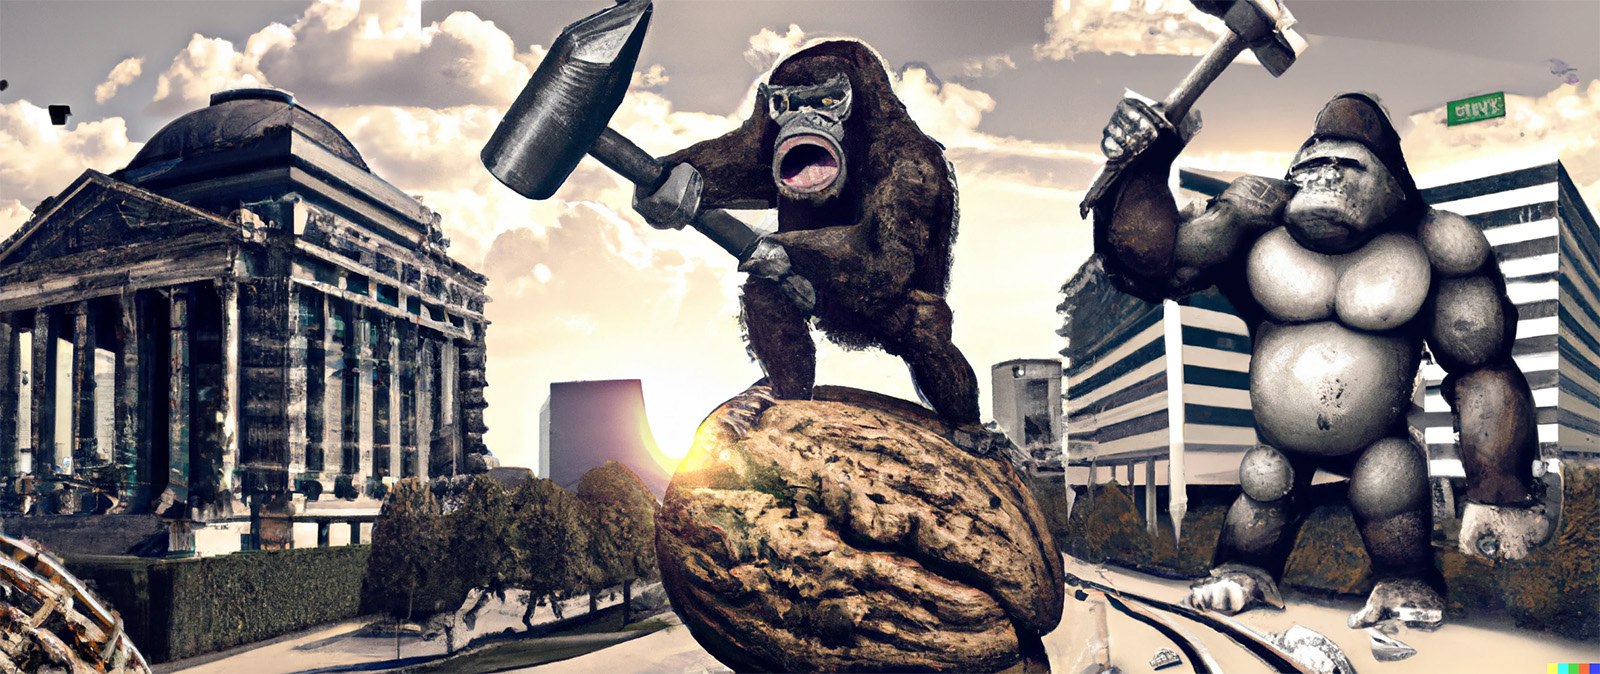 gorillas with big hammers cracking a walnut